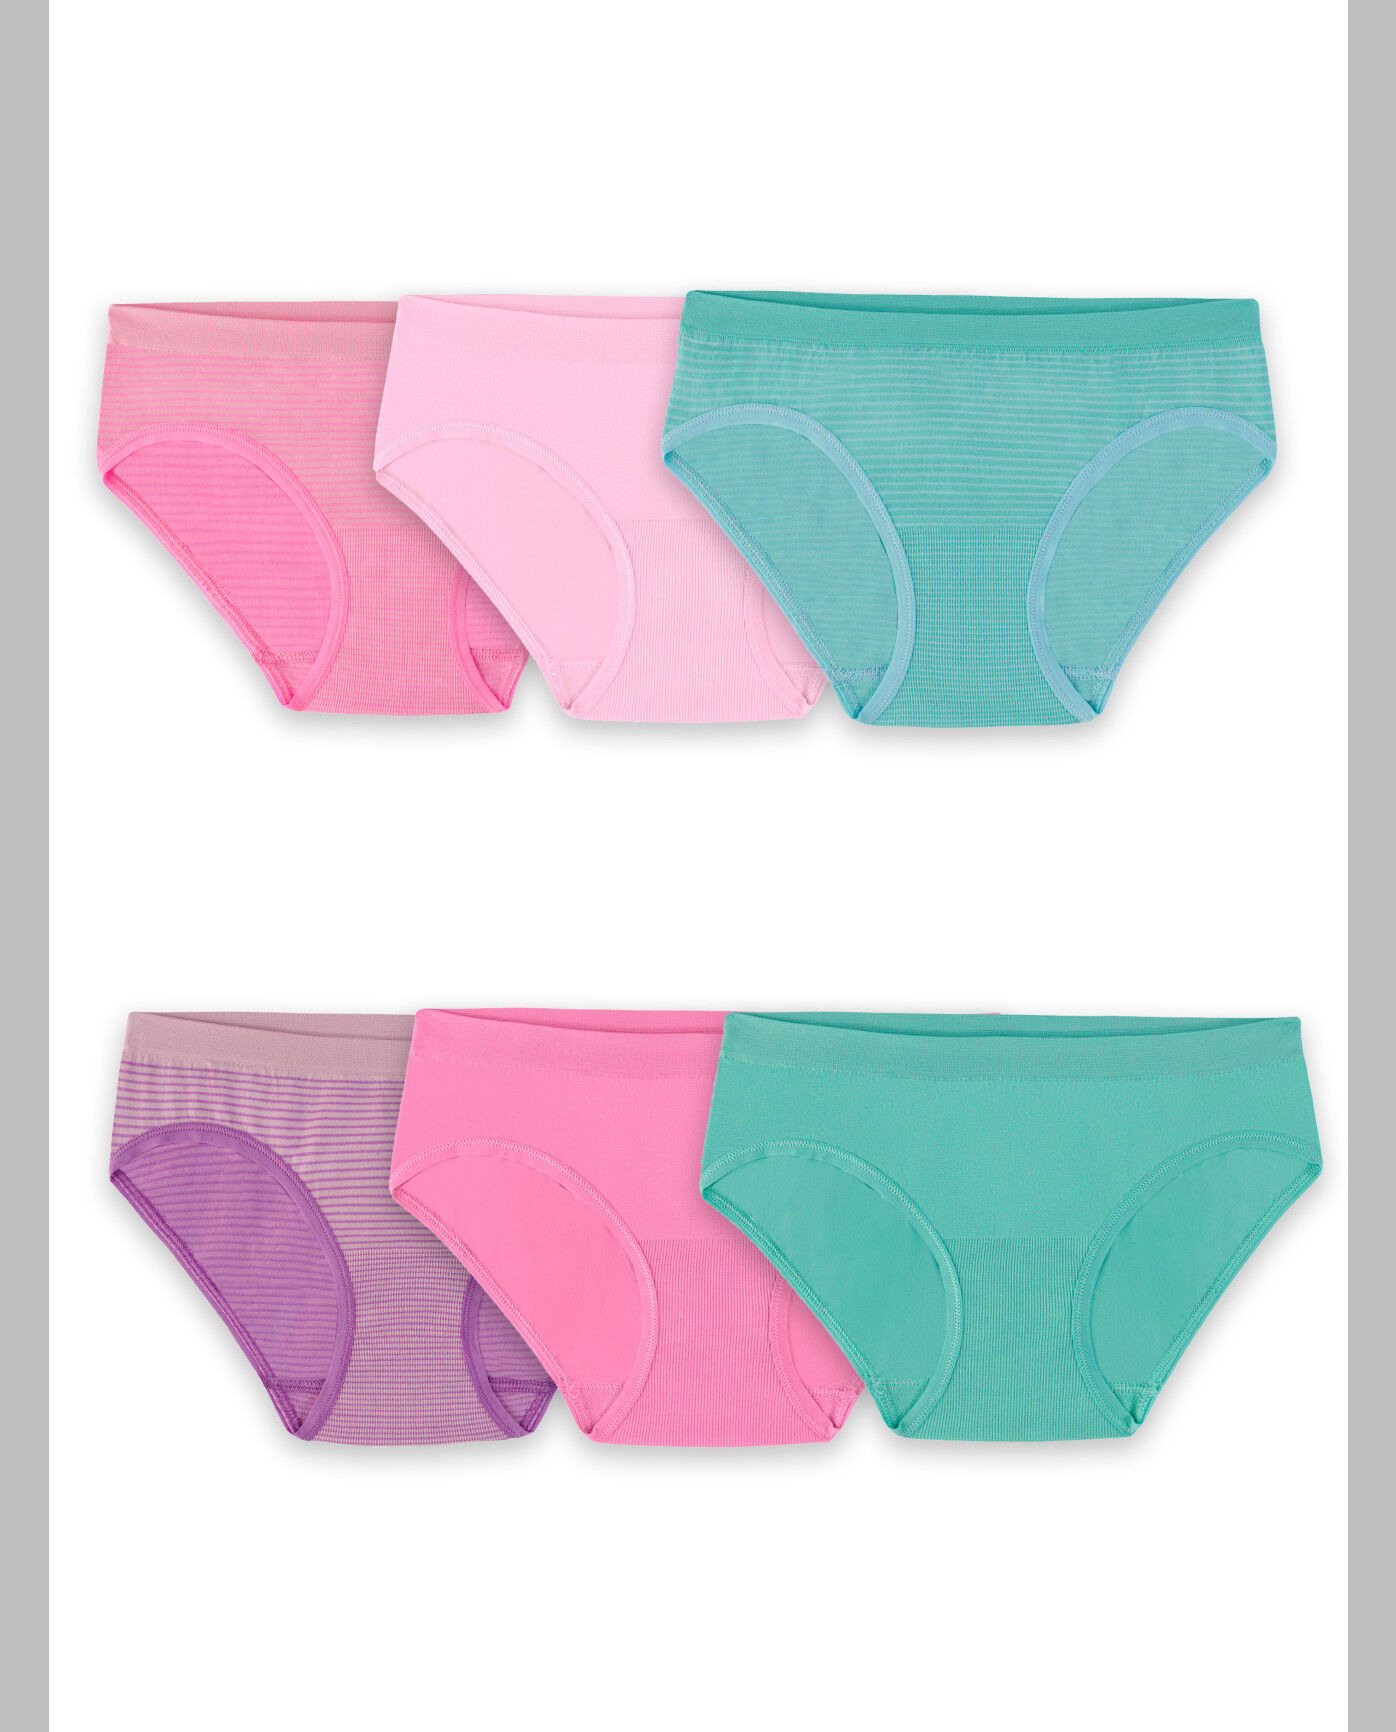 Hipster for Tweens & WomenLeakproof Briefs for Light Details about   Bambody Period Panties